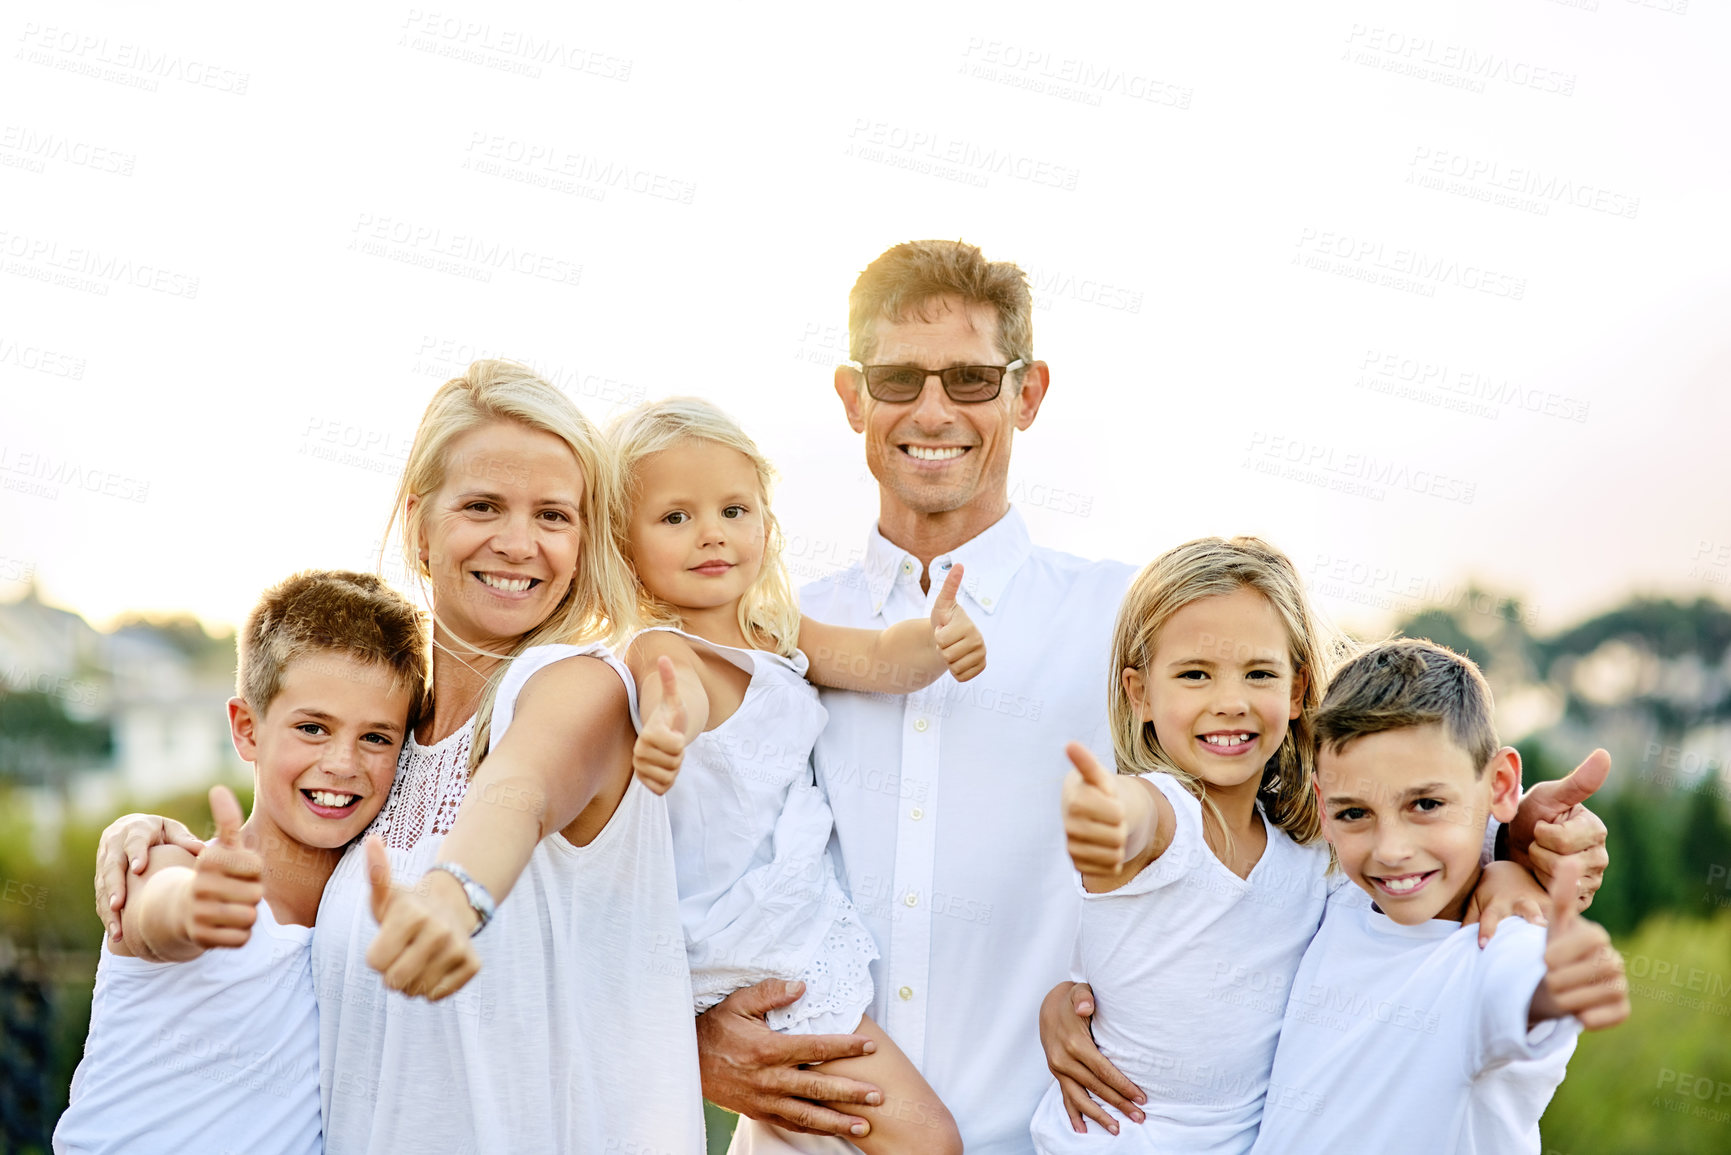 Buy stock photo Shot of a happy family with their thumbs up outdoors